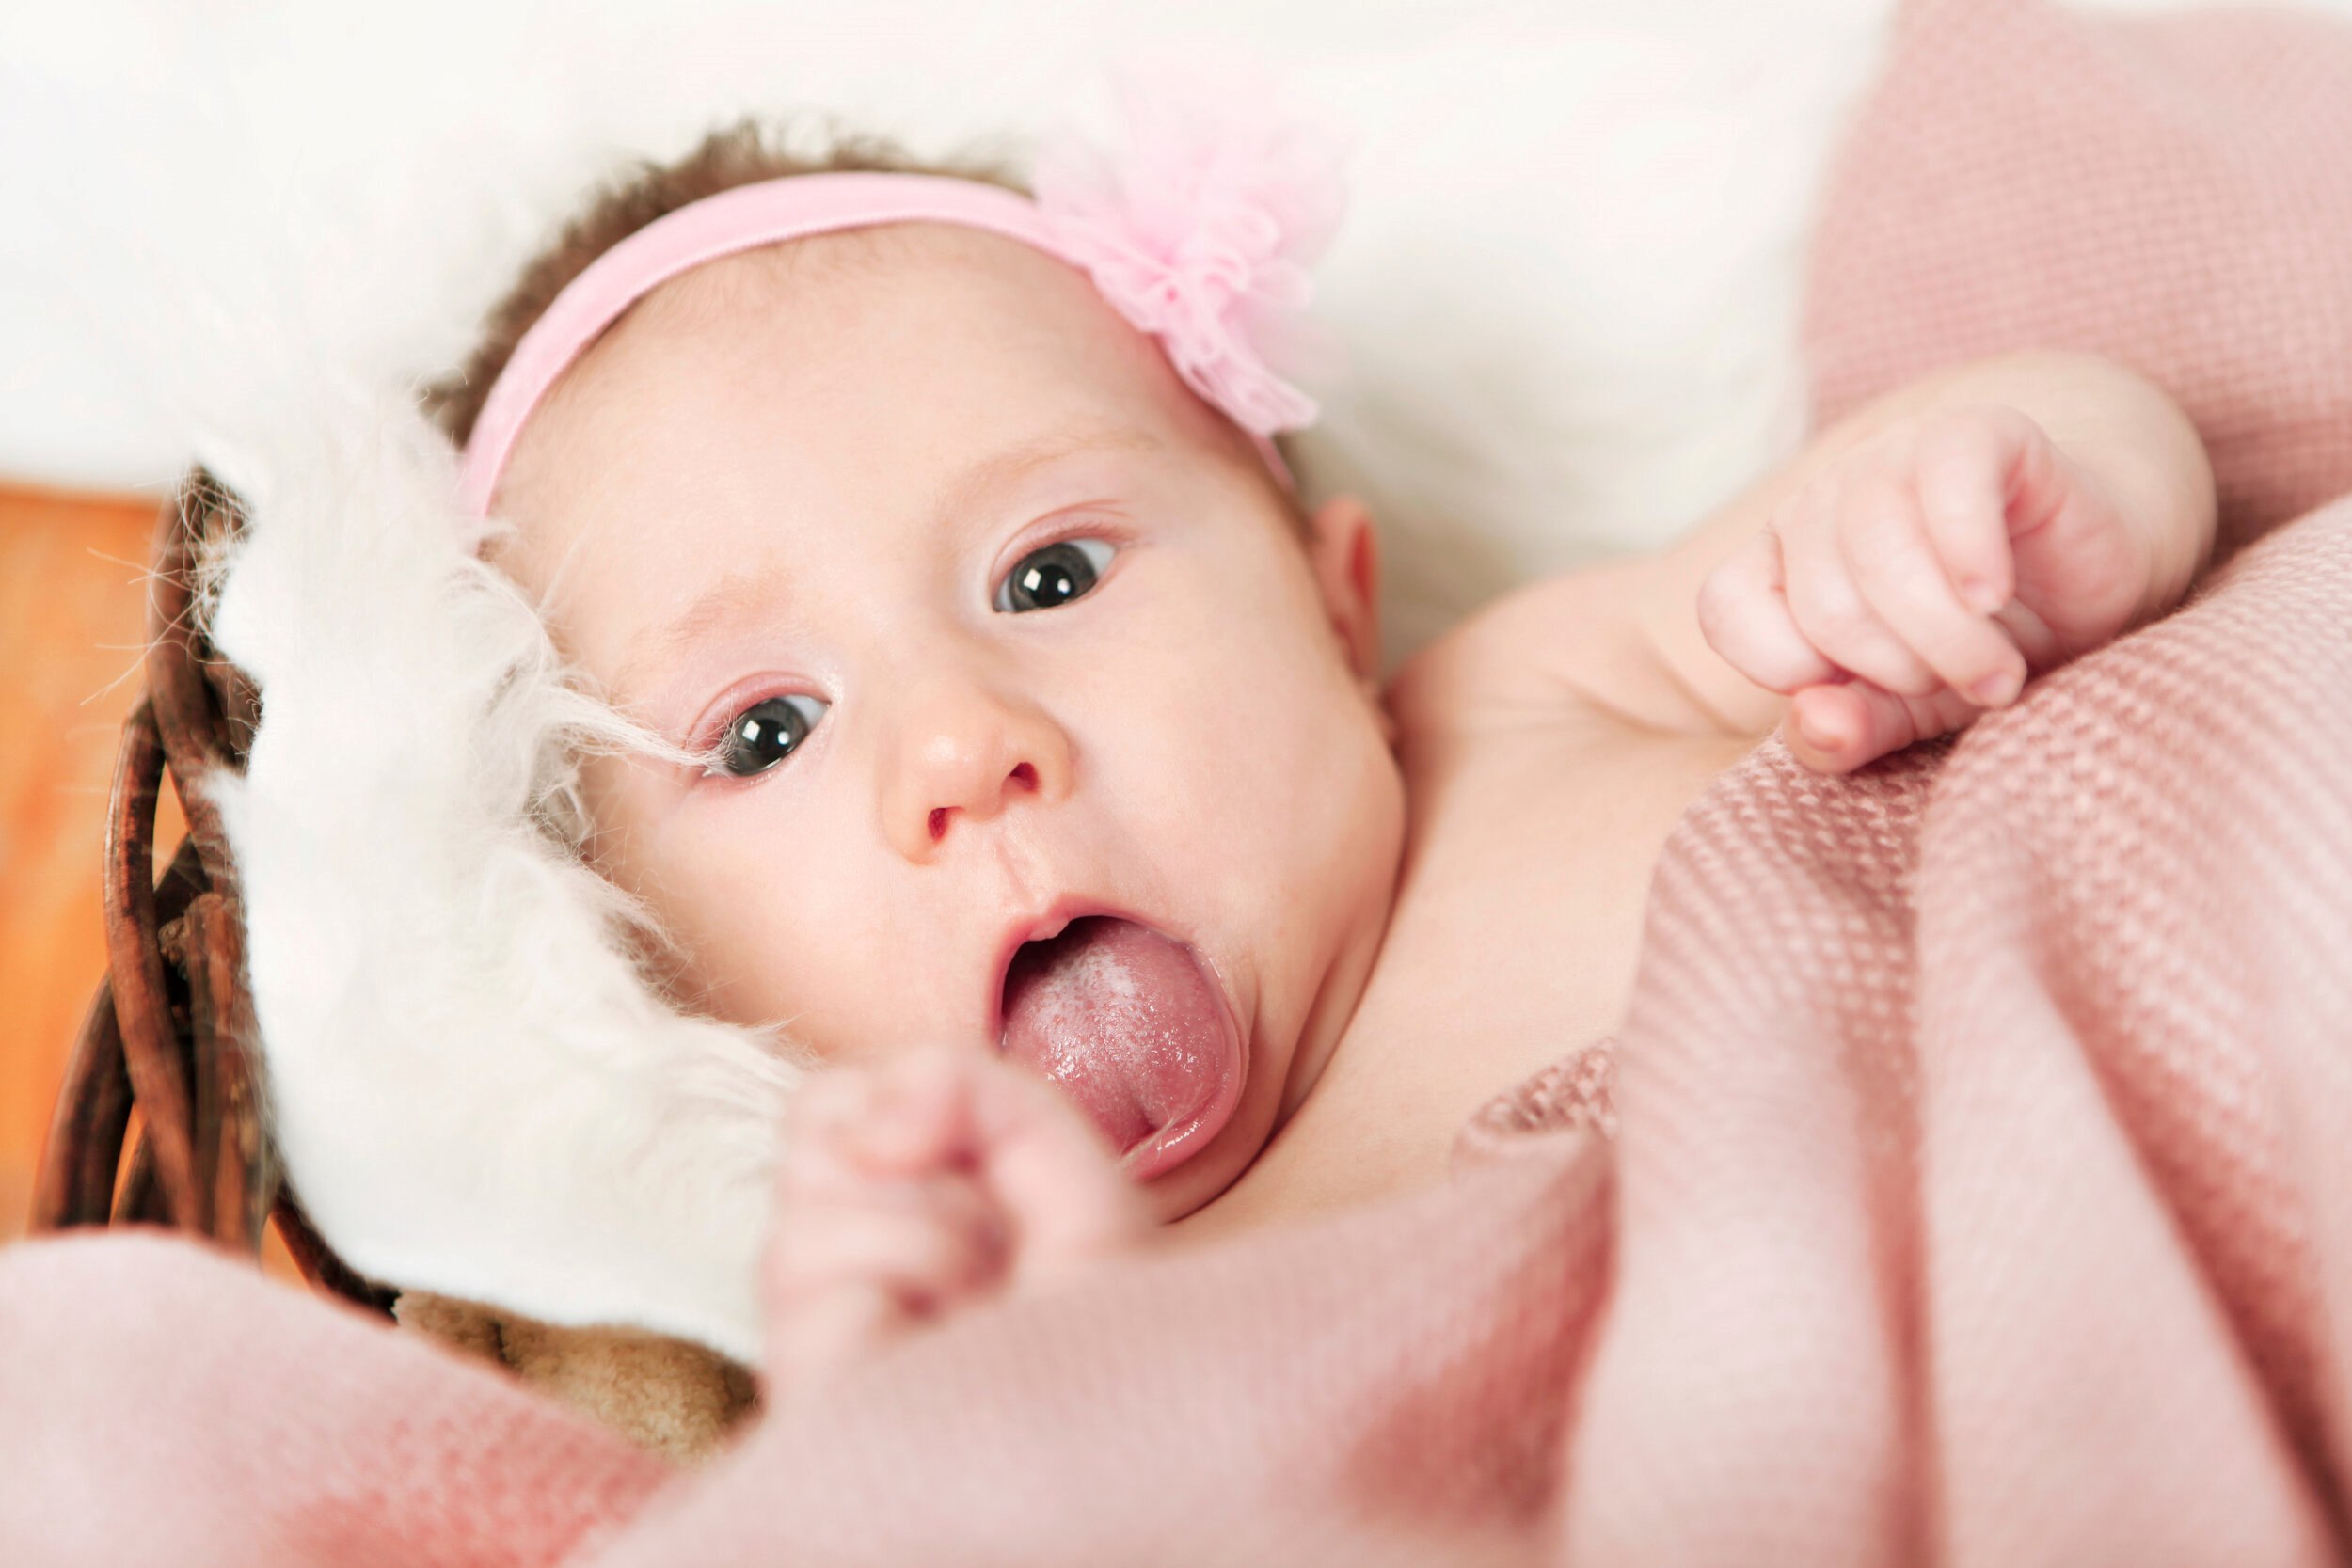 You Won’t Believe Why Babies Are Clicking Their Tongues!